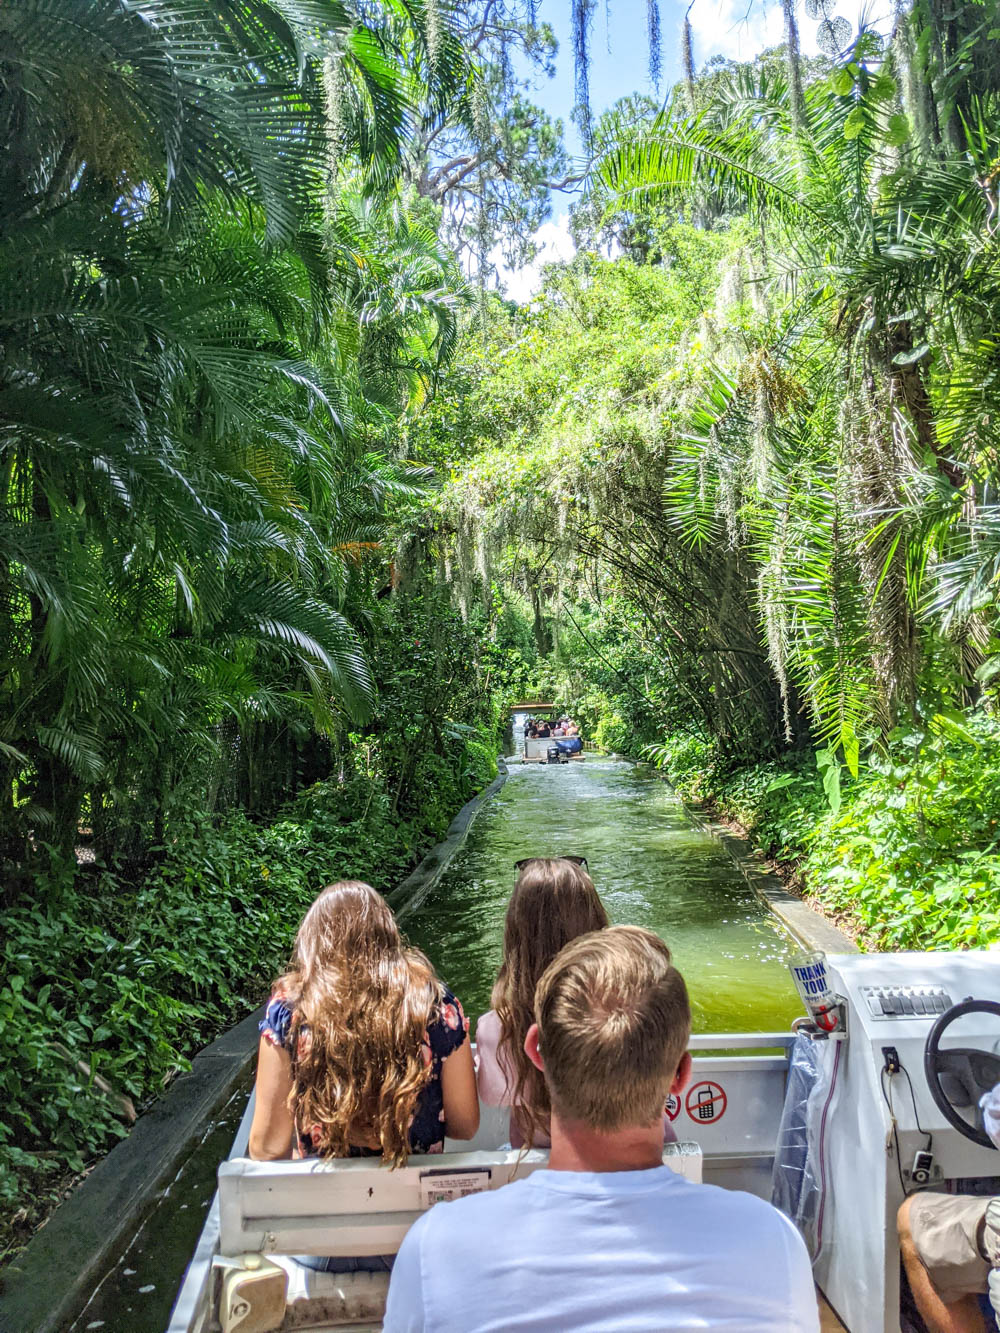 Winter Park Scenic Boat Tour | The Best Things to Do in Orlando Besides Theme Parks: Orlando, Florida for adults